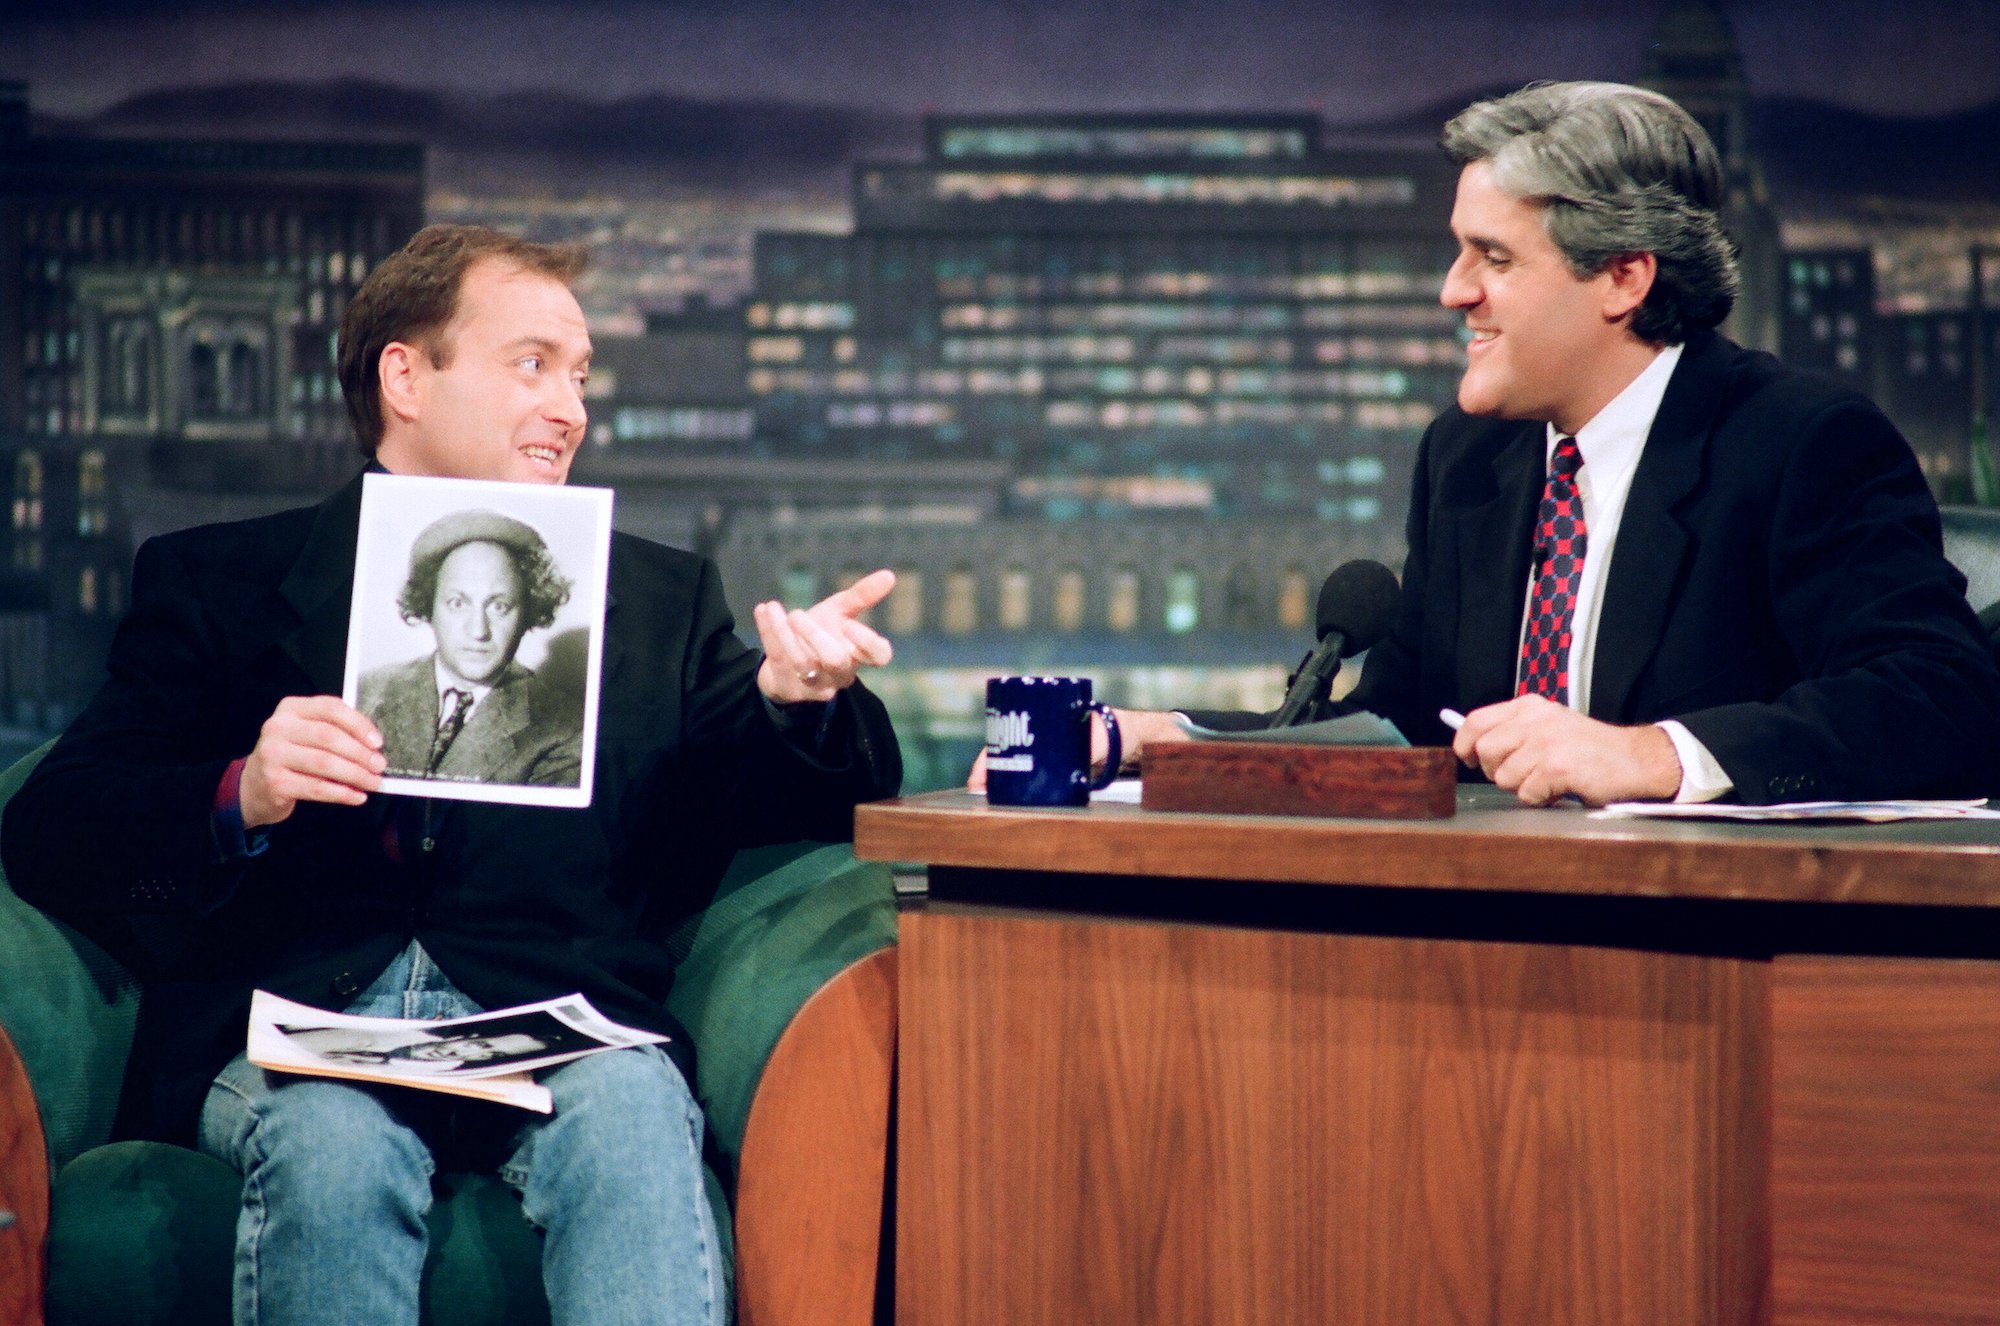 Voice actor Billy West during an interview with host Jay Leno